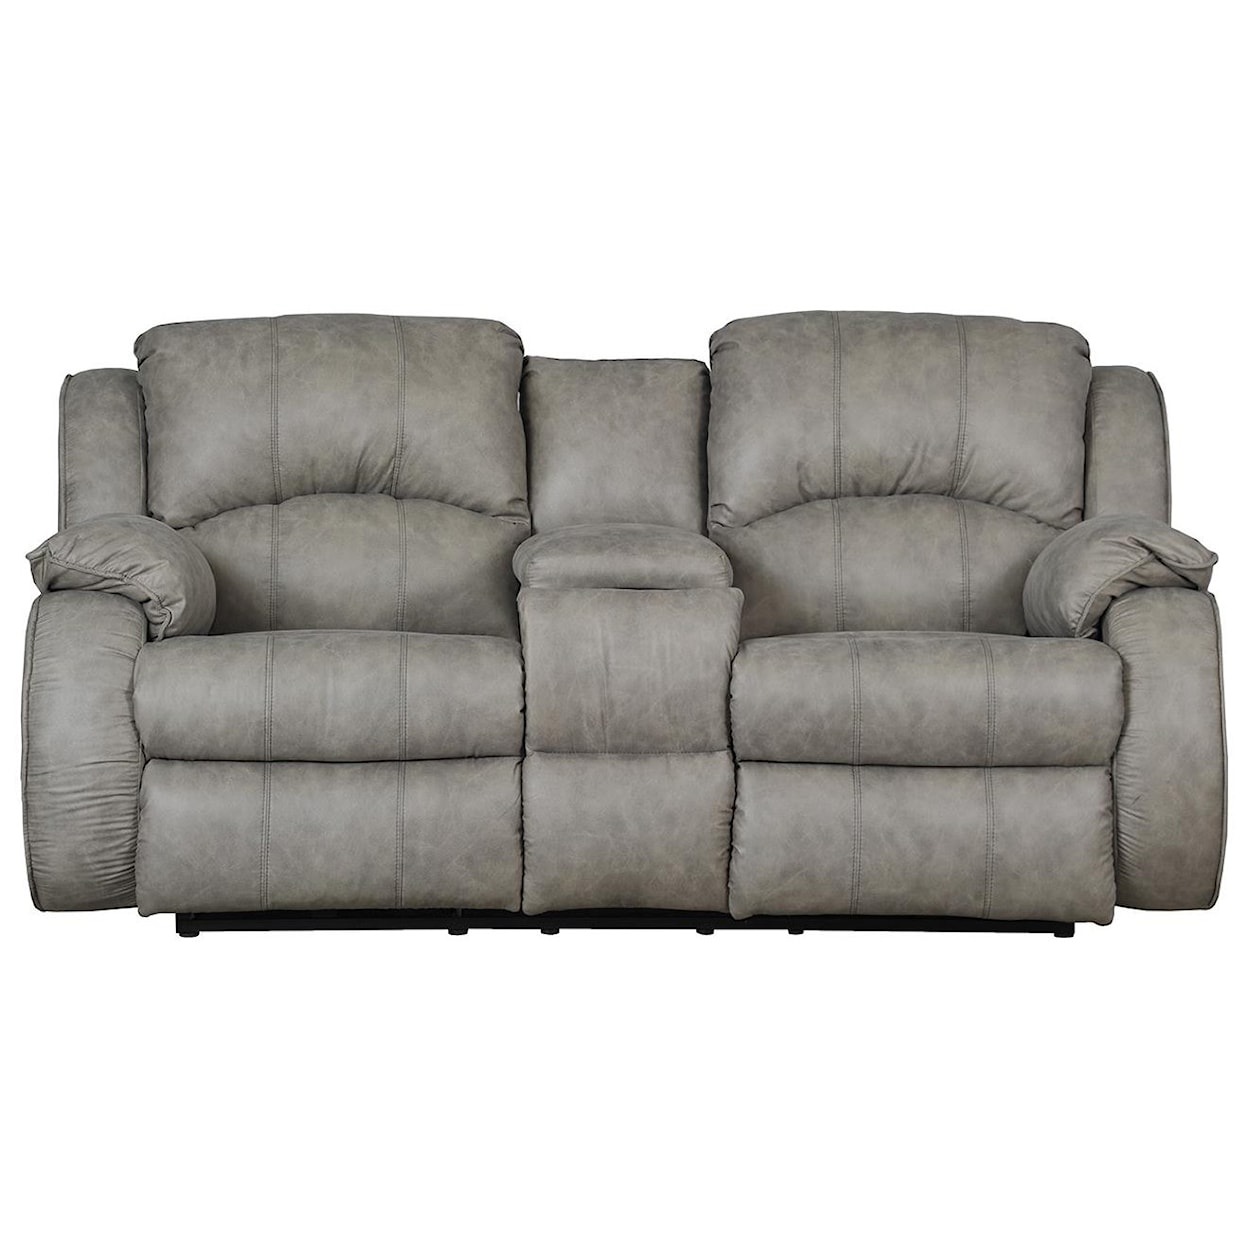 Southern Motion Cagney Power Reclining Loveseat